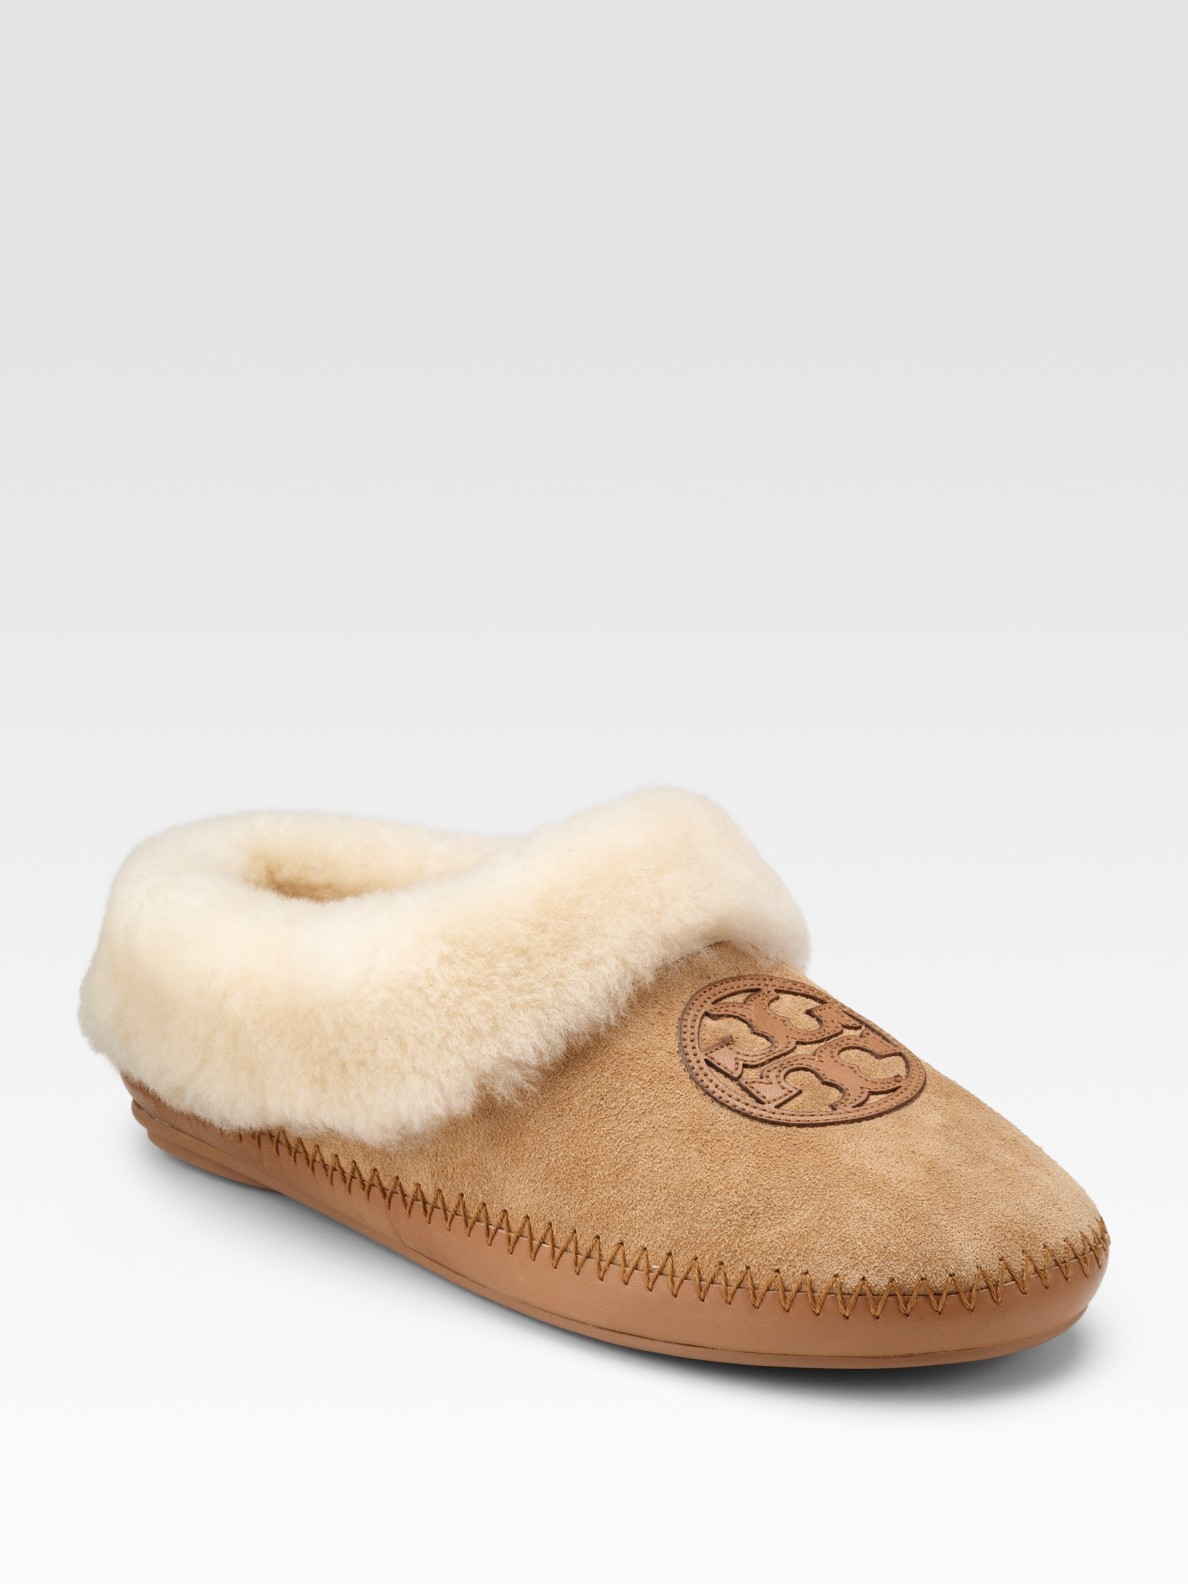 Descubrir 64+ imagen tory burch coley shearling slippers